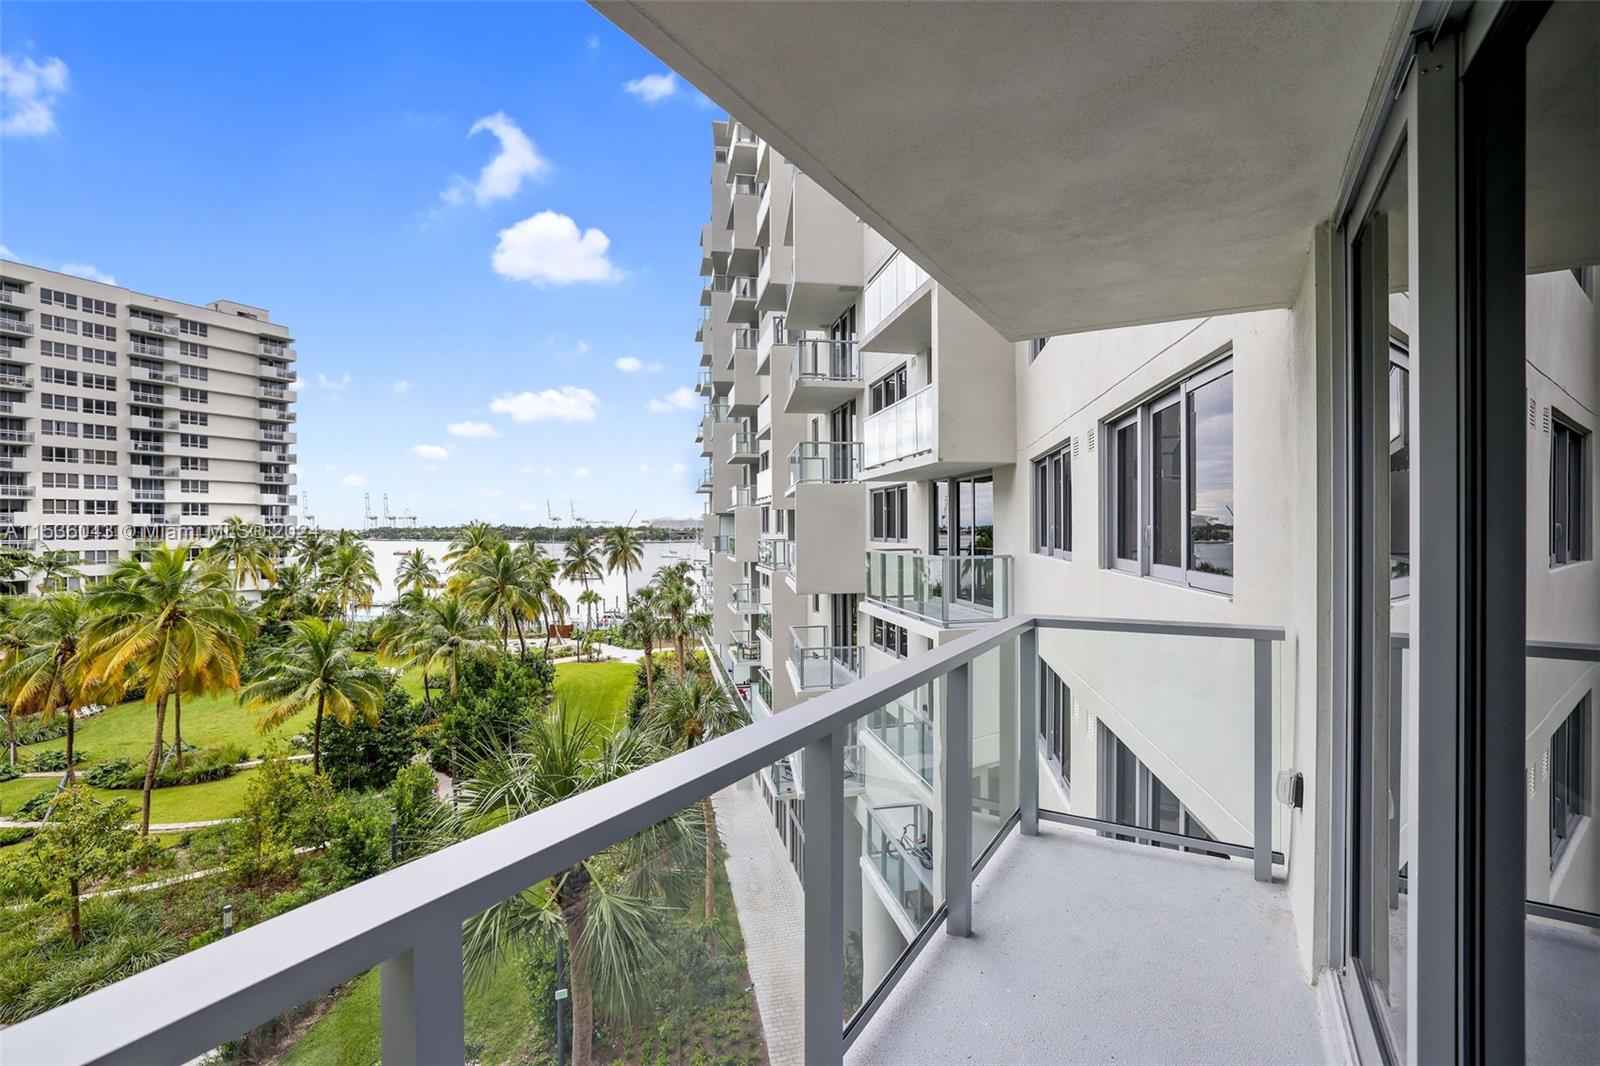 AVAILABLE 03/16. Welcome to Flamingo Point Miami Beach's most exciting rental community. This newly renovated unit features hardwood floors, modern kitchen & baths w/SS appliances & granite counter tops. Amenities include fitness center, two resort style pools with private cabanas, BBQ area and much more. Move in costs are 1st month + $1500 deposit. Parking cost 1st vchl. $187 p/m. Pet Fee: $400+$50/m. *FAST APPROVAL! (NOTE: Rental rates are subject to change depending on move-in date and lease term. Advertised rate is best rate and maybe on leases longer than 12 months. Income must be greater than 3x one month's rent and minimum credit score of 620 in order to be approved).